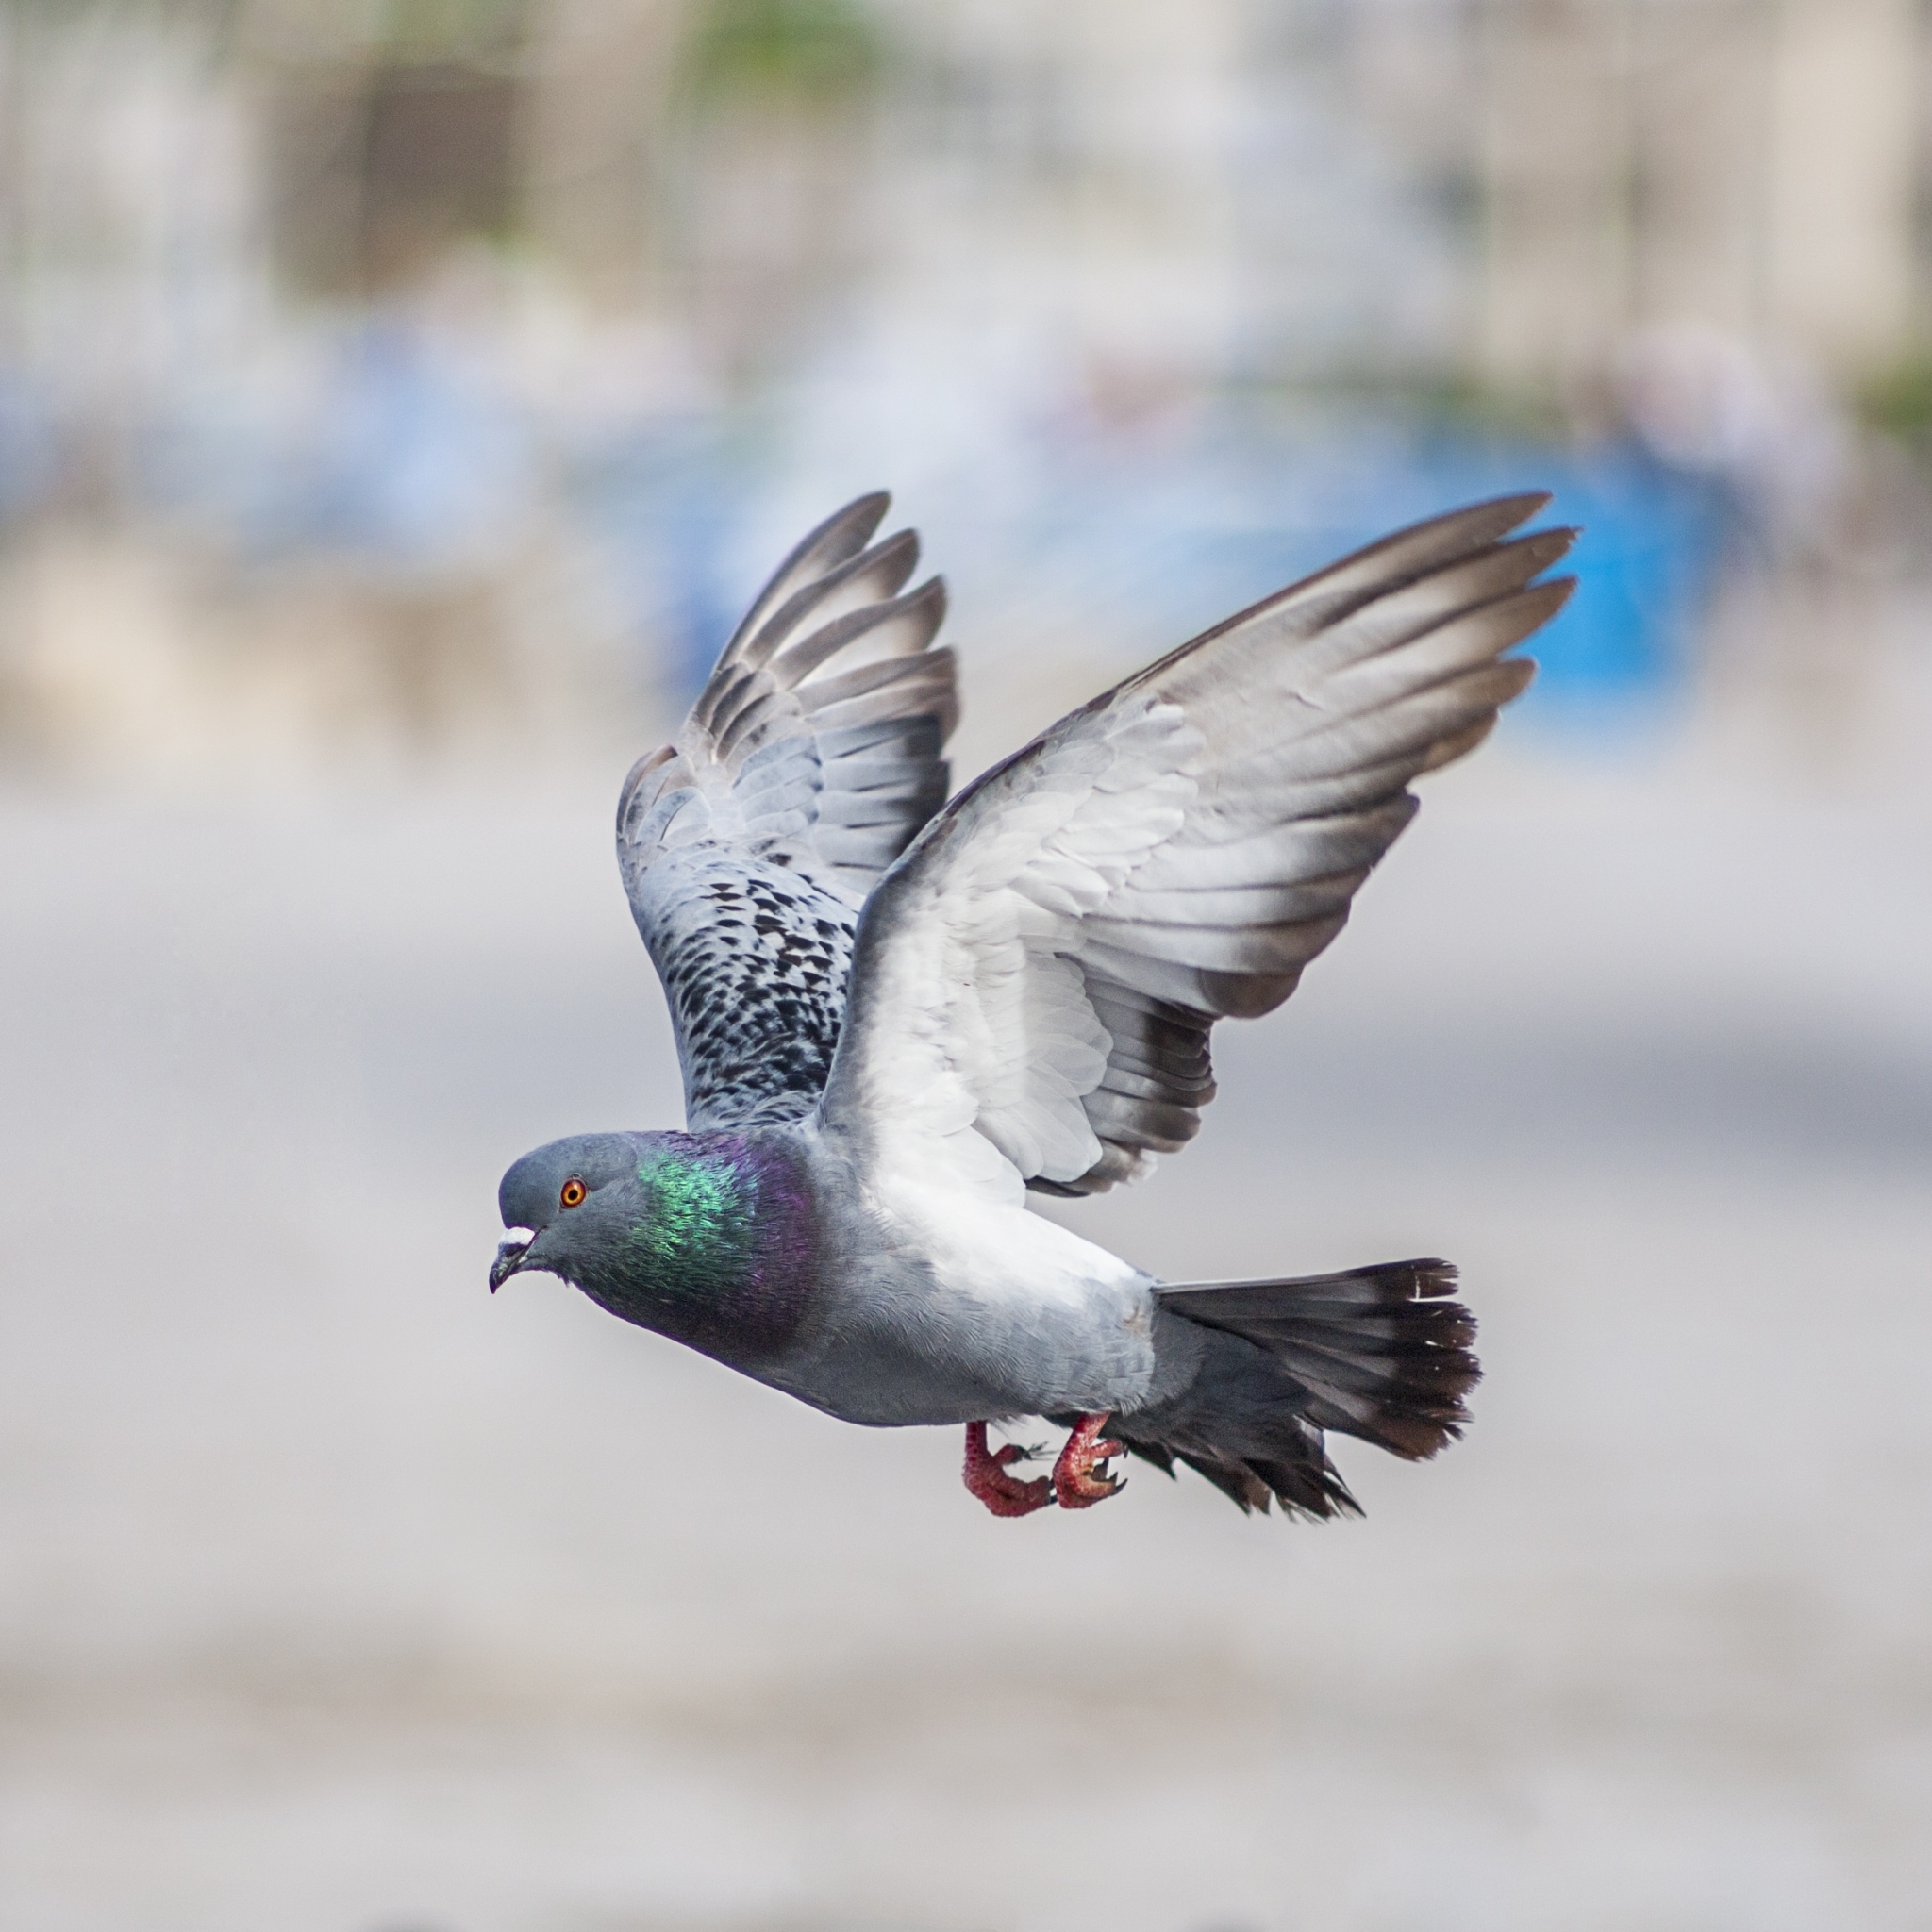 Pigeon in flight by Abdou Moussaoui